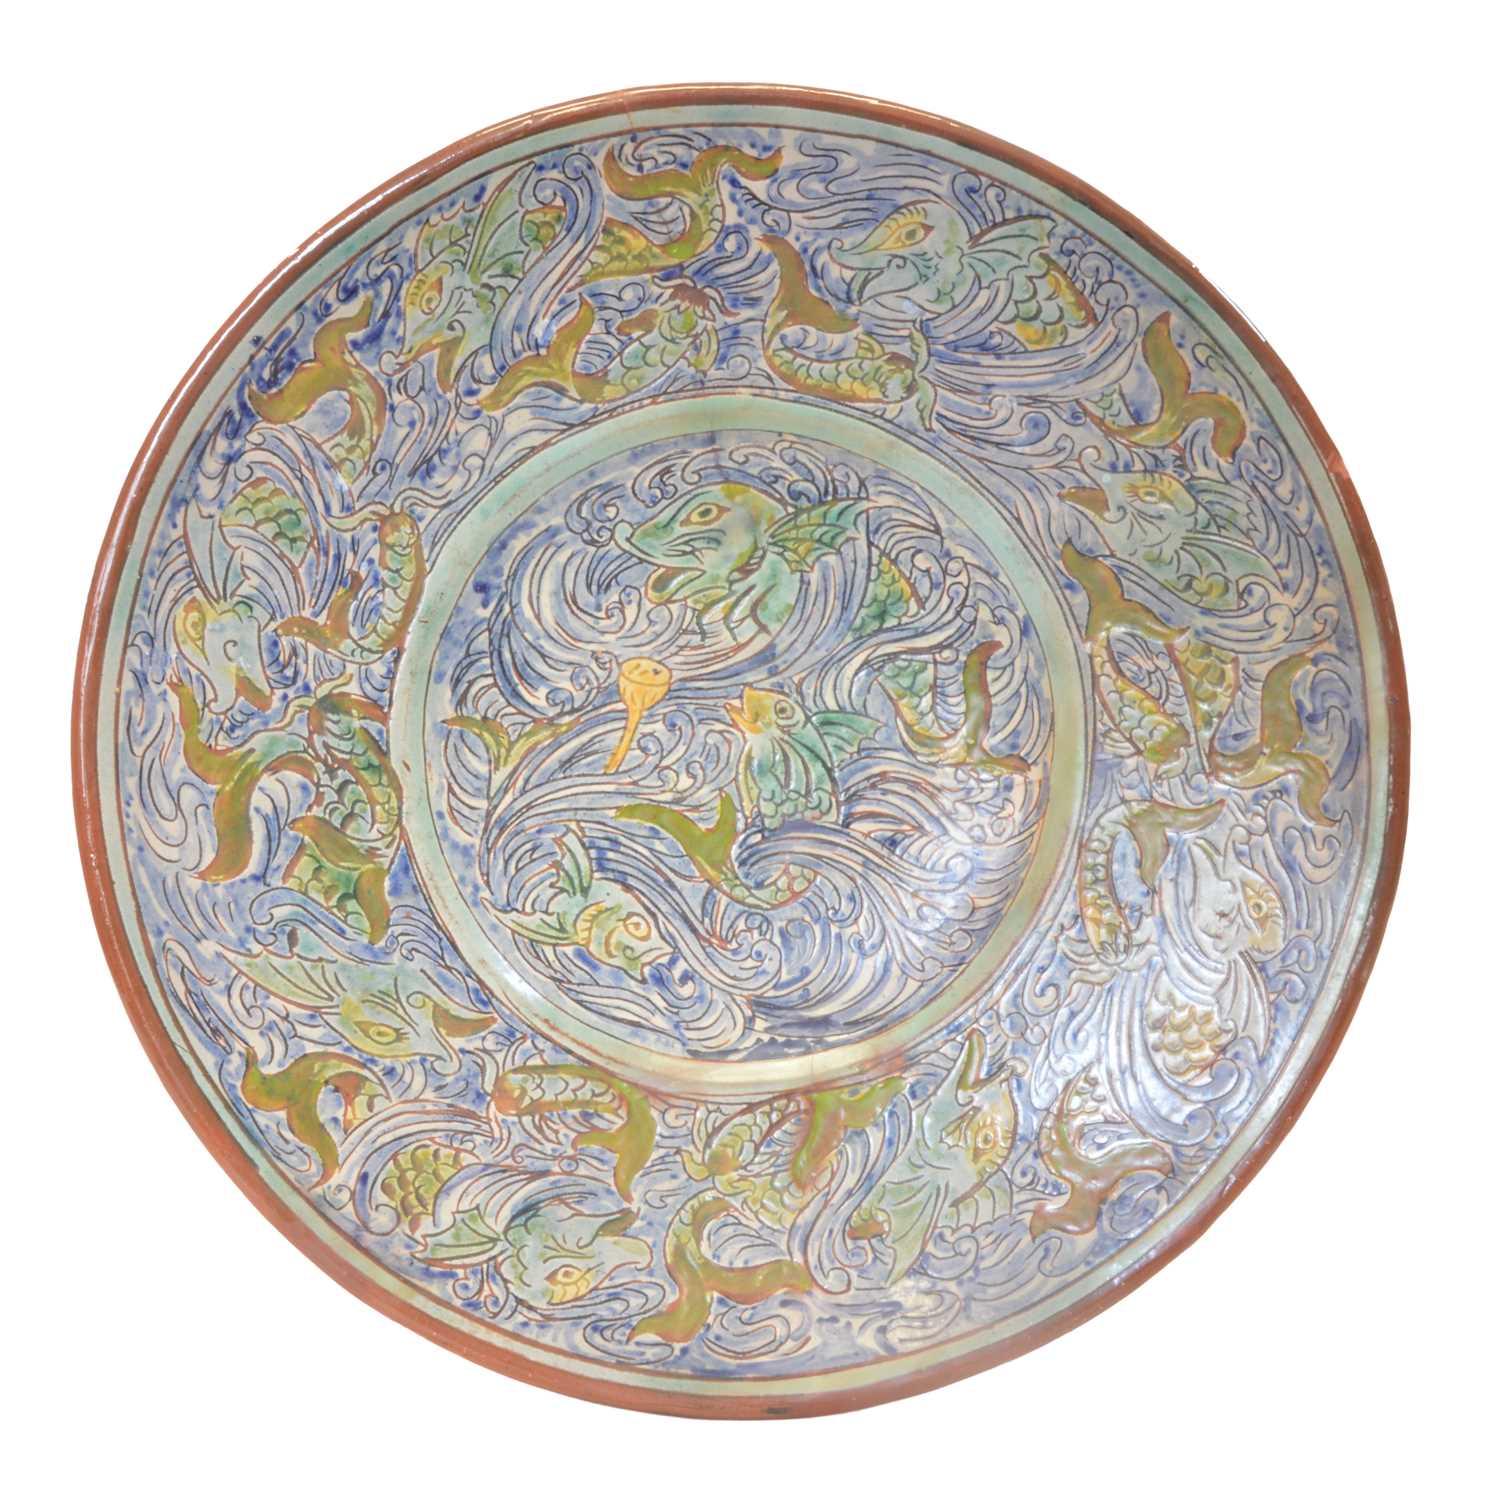 Lot 17 - Della Robbia charger by GHS